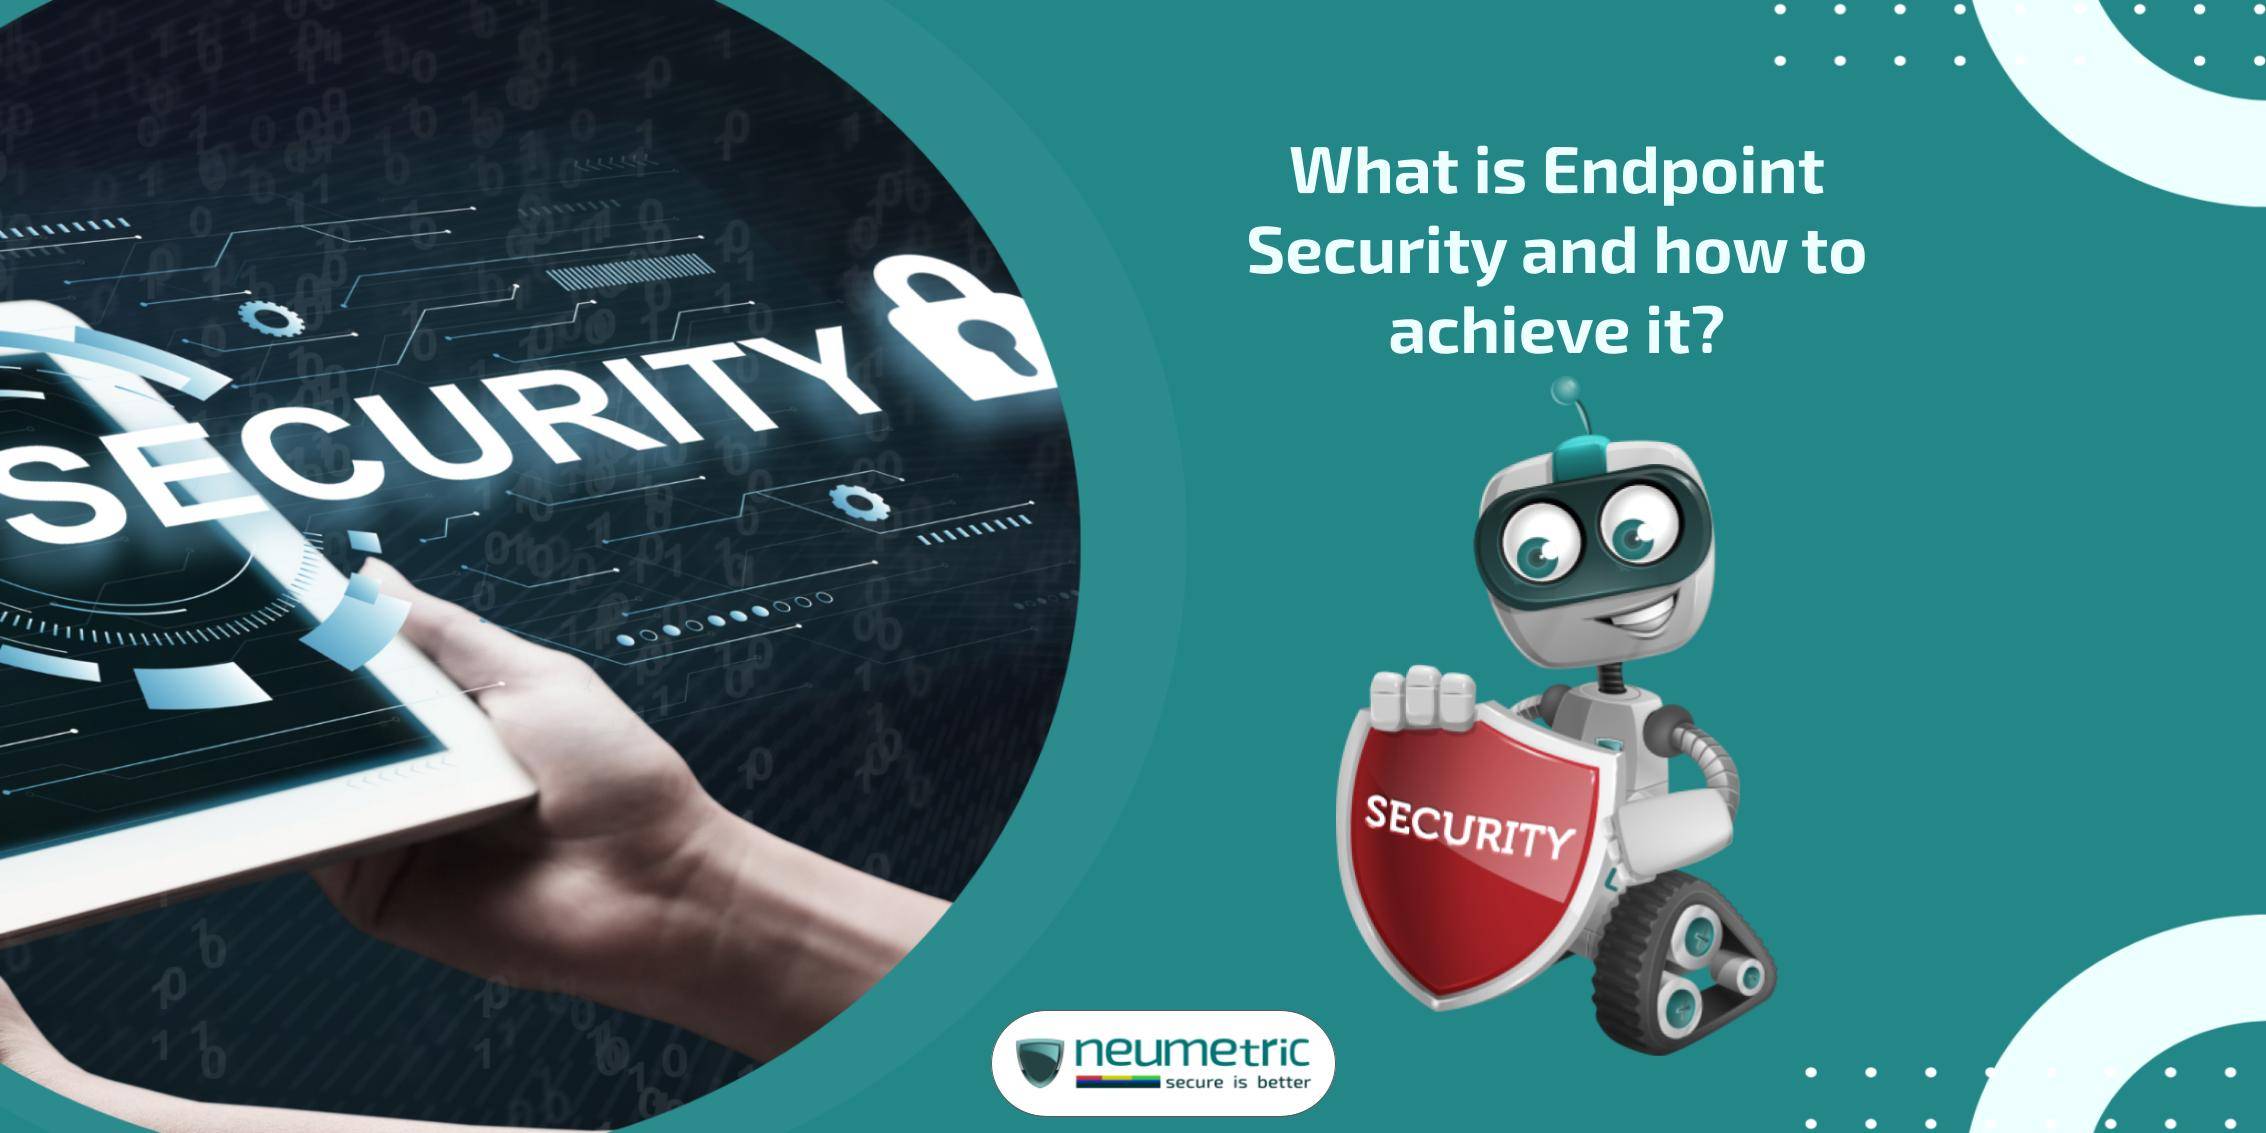 What is Endpoint Security and how to achieve it?